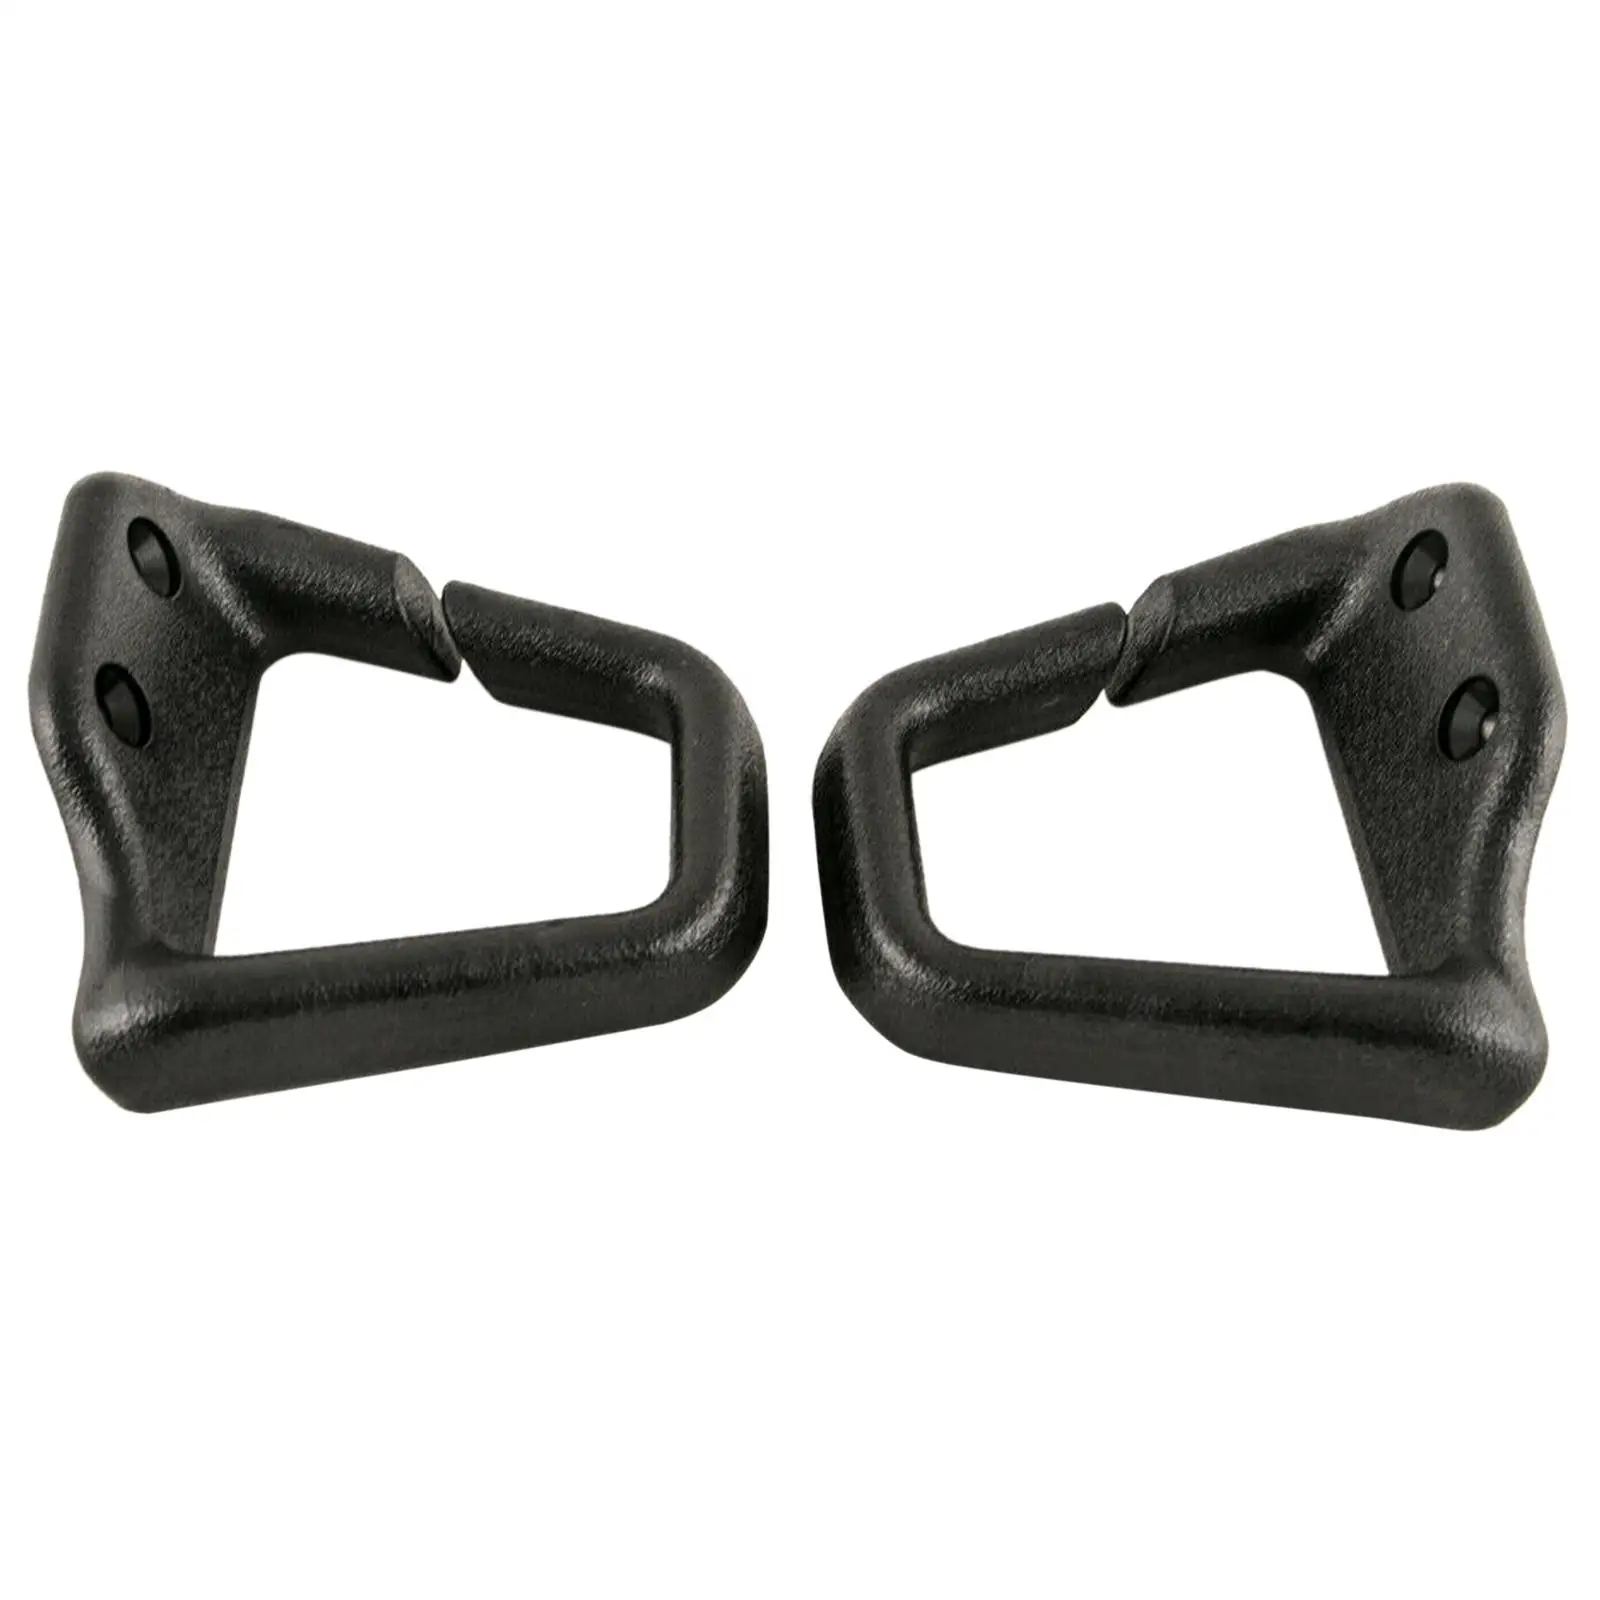  Vehicle   Clips Buckle Stopper Front Black Clamp Adjuster   Loops Fit for   93-02 Replacement